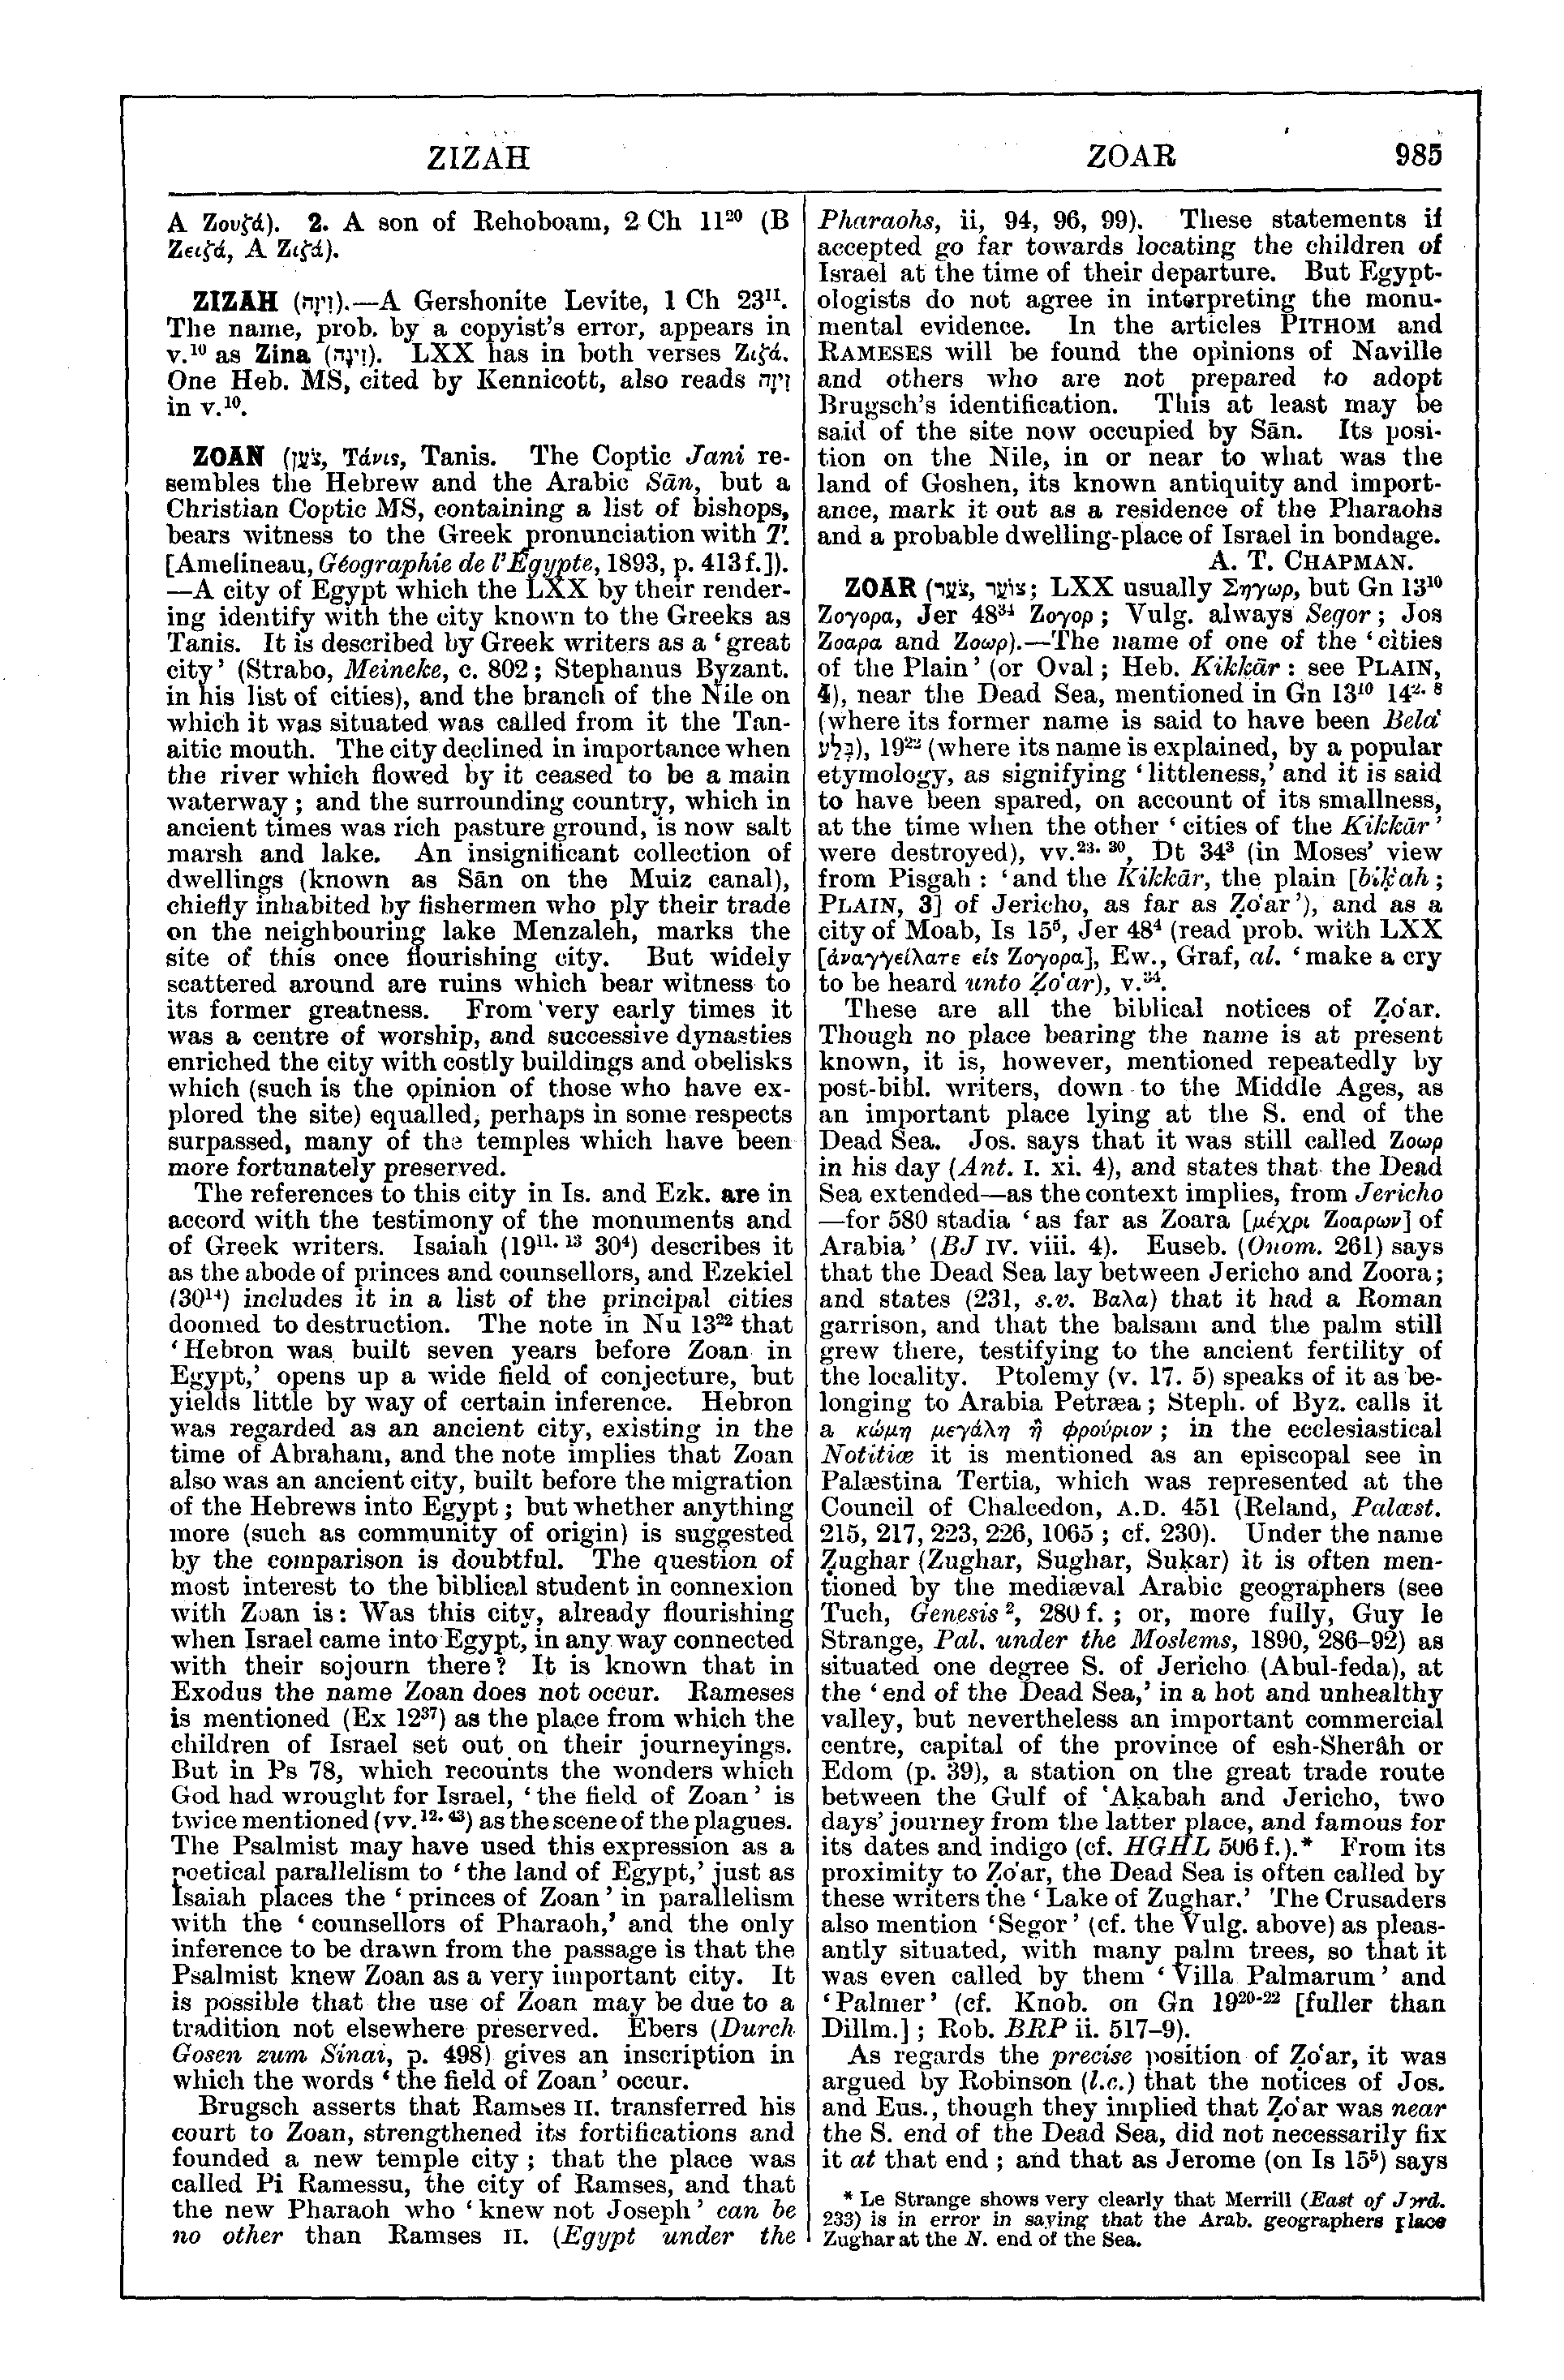 Image of page 985